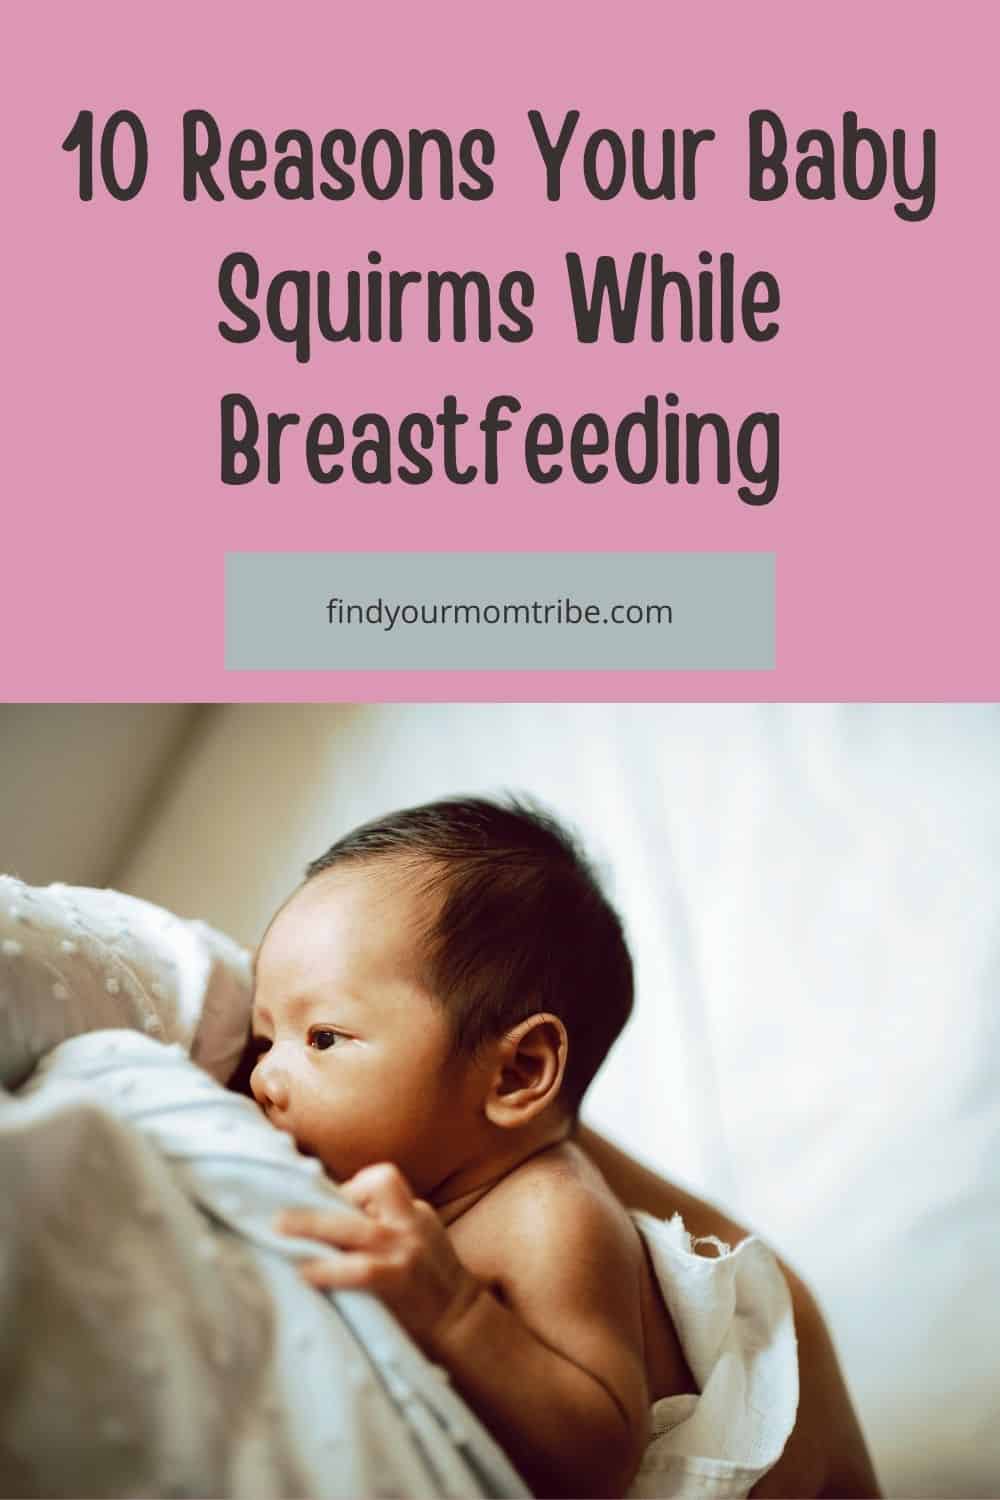  Pinterest baby squirms while breastfeeding